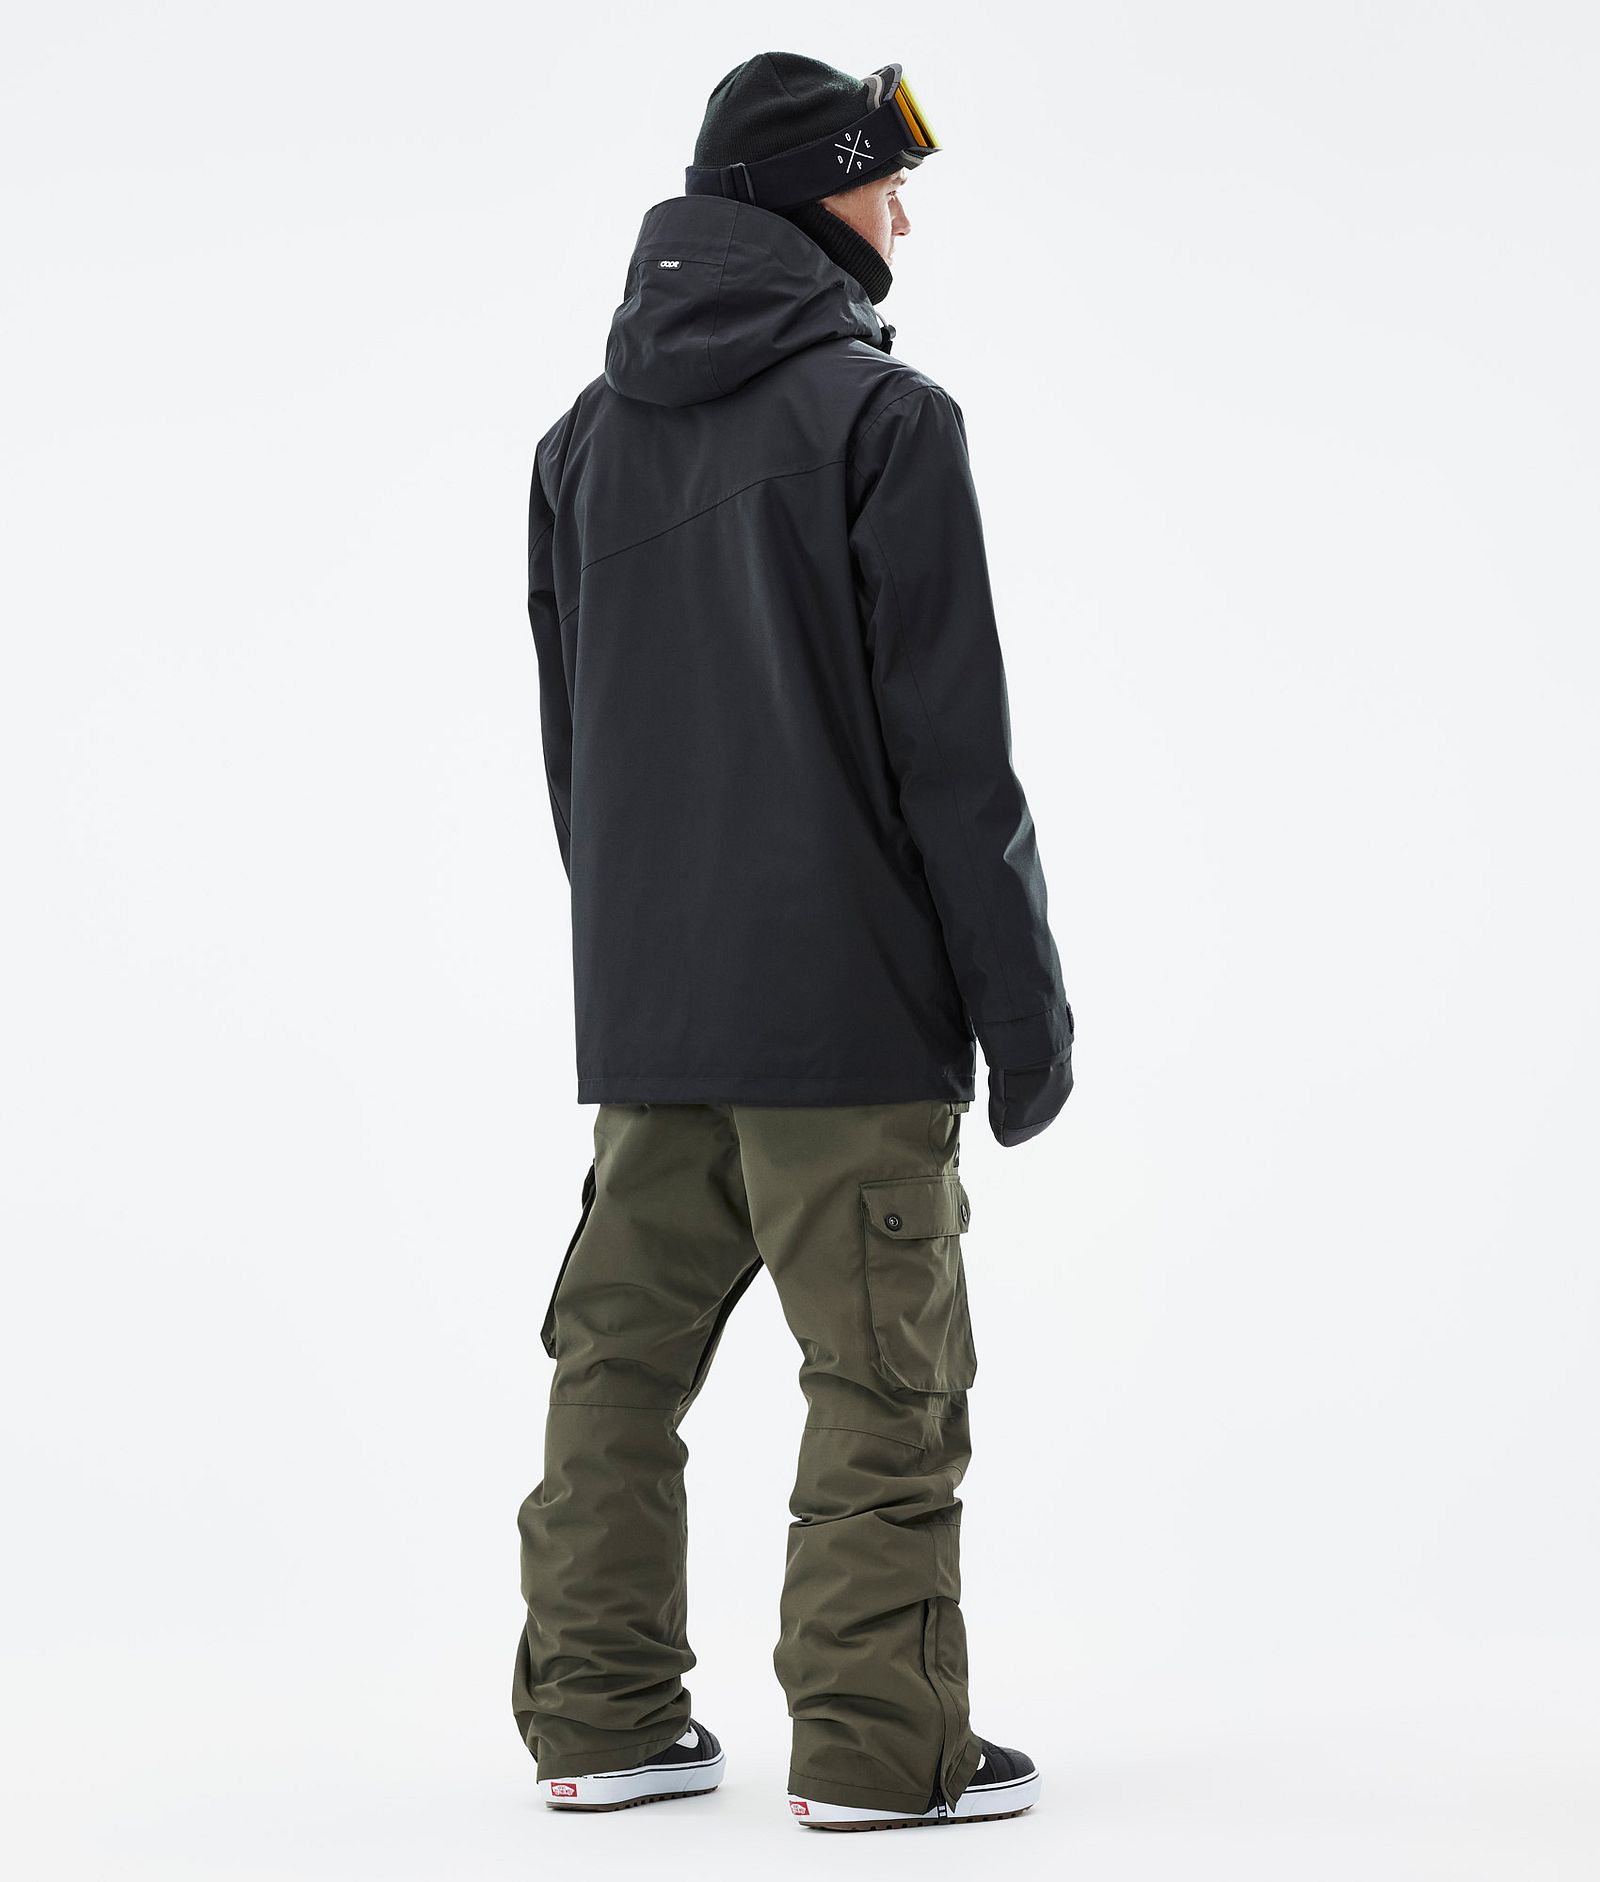 Dope Adept Lumilautailu Outfit Miehet Black/Olive Green